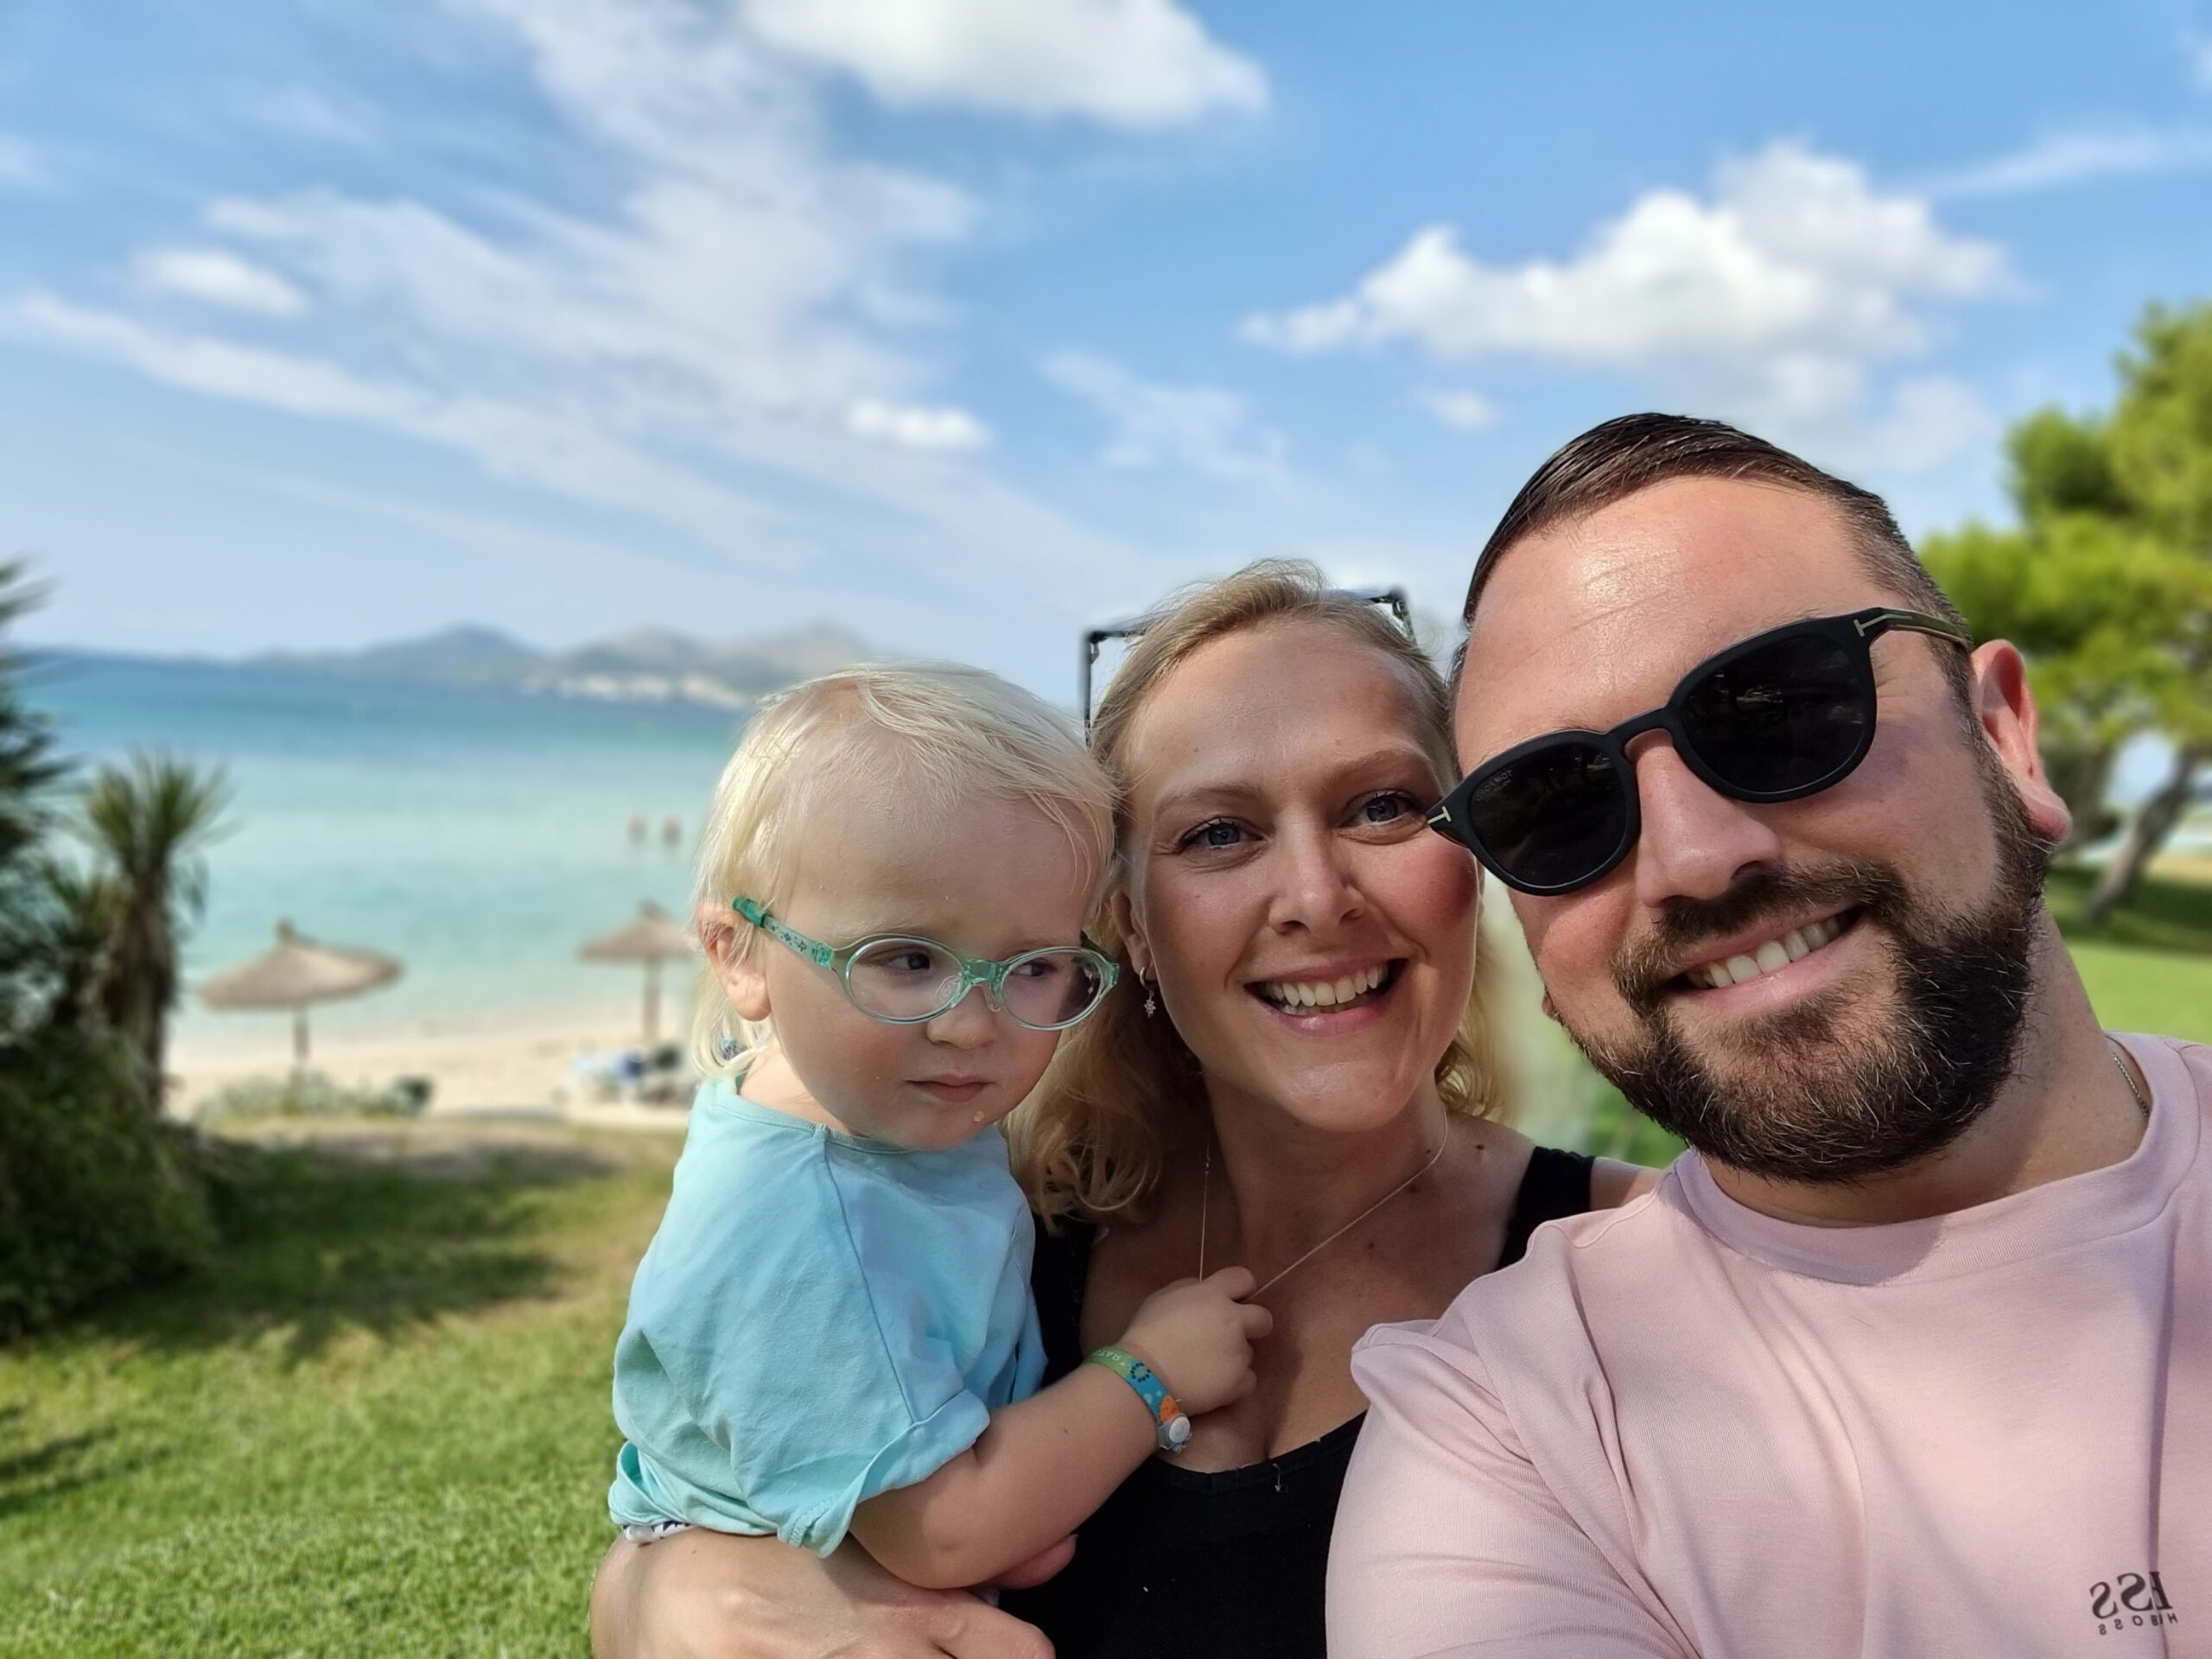 James’s nystagmus story